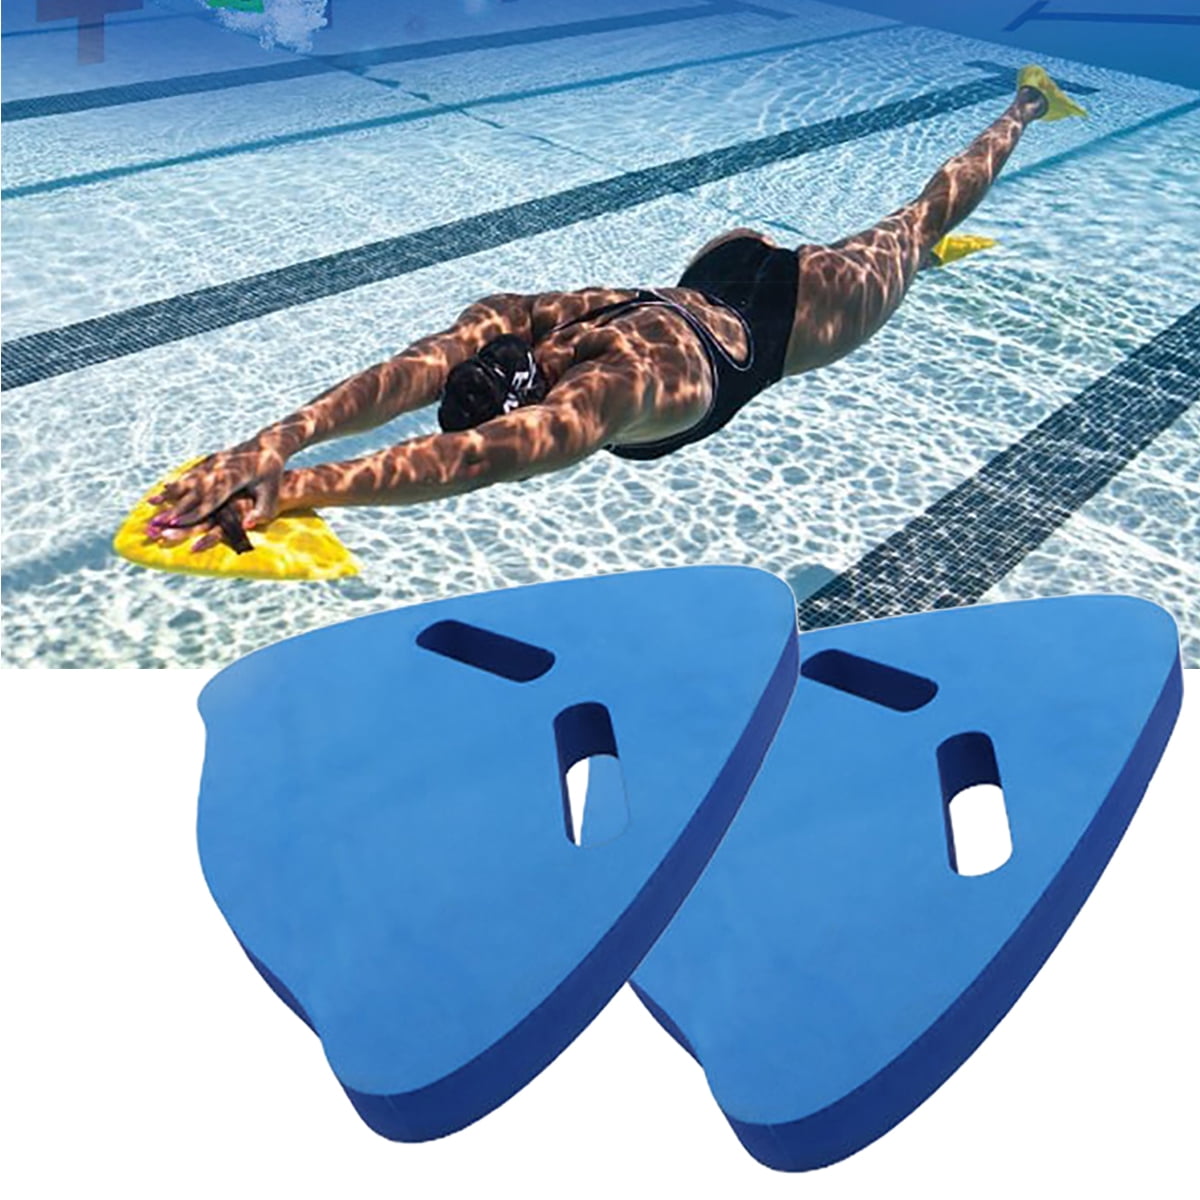 Marine Life Floating Training Aid Exercise Training Boogie Board in 3 Styles Summer Fun Swimming Pool Toys Party Favors for Children Swimmer Beginner 3 Pack Learn-to-Swim Swimming Kickboards for Kids 